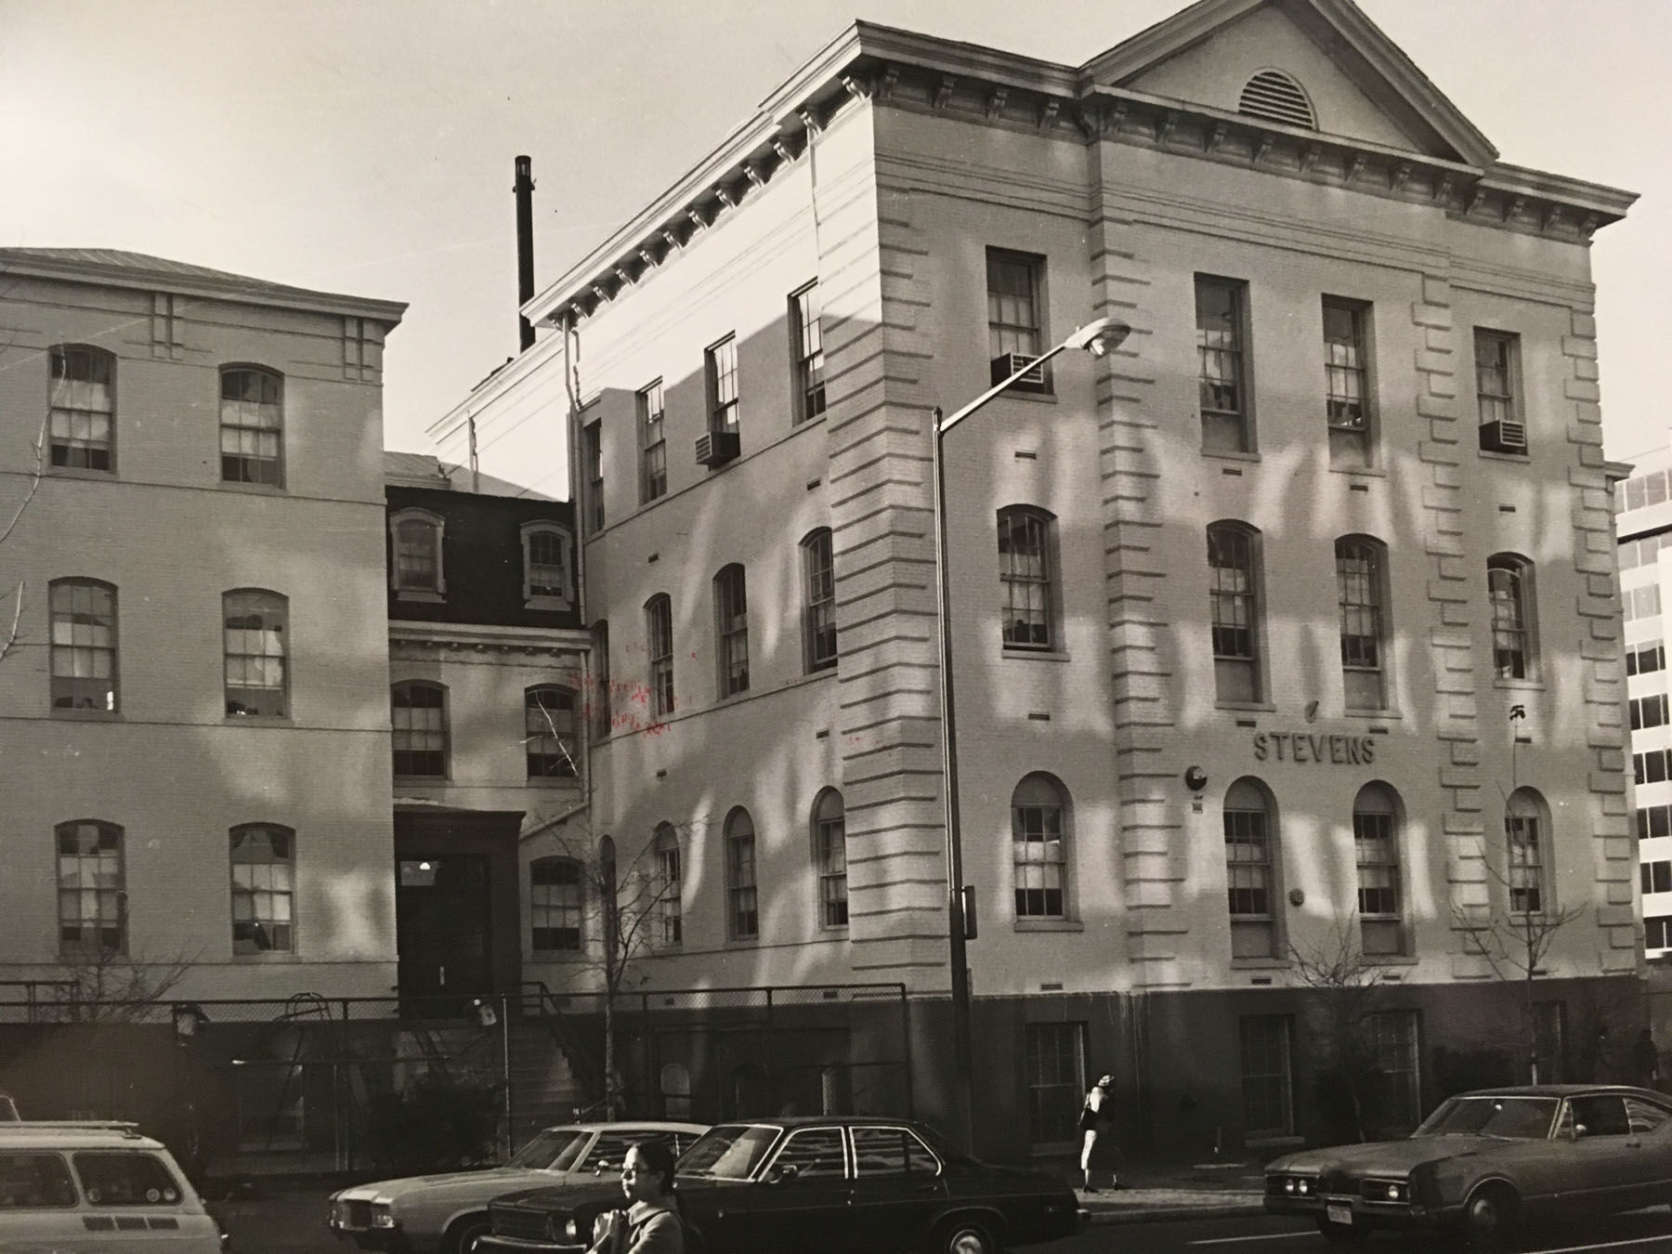 A 1980 photograph showing Stevens Elementary School a few years after Amy Carter attended there. (Courtesy Charles Sumner School Museum and Archives)